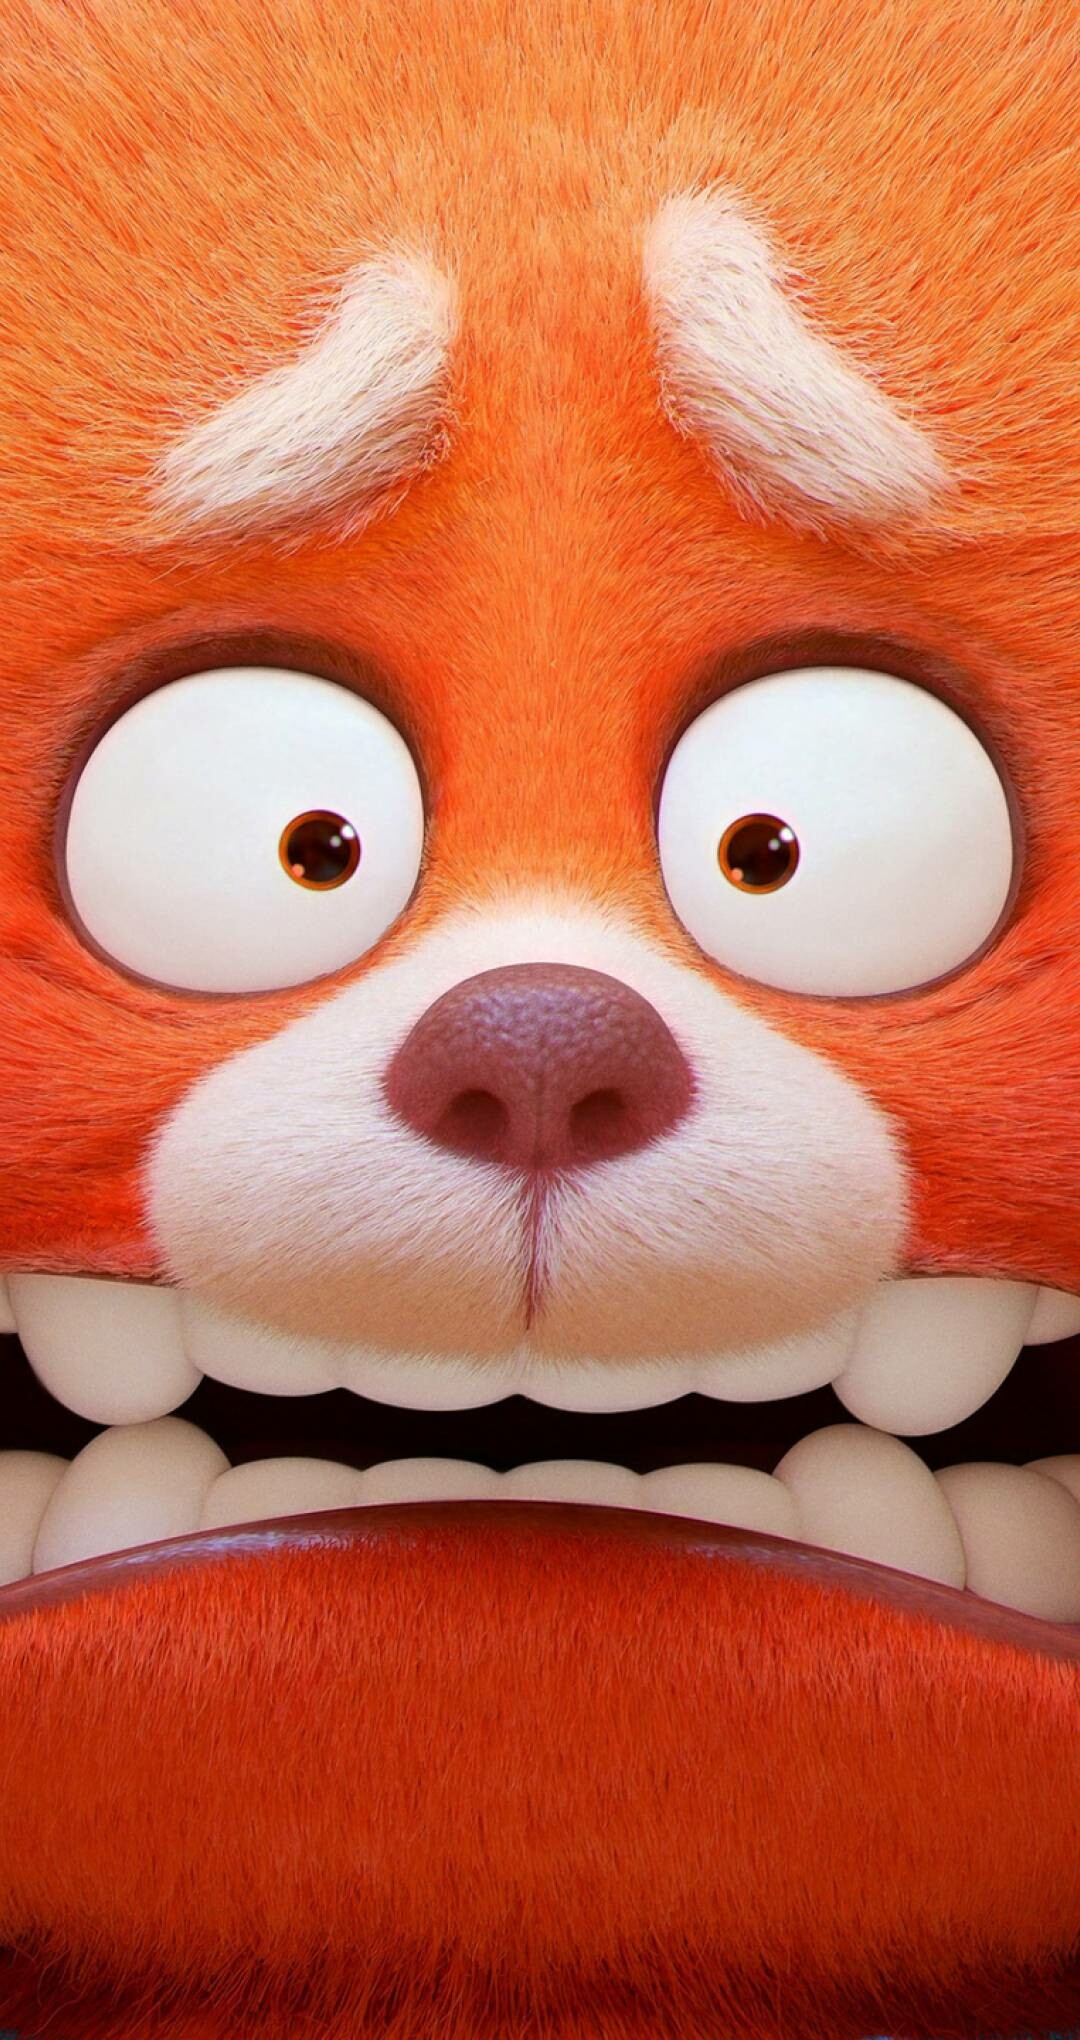 Turning Red: Mei Lee, due to a hereditary curse, transforms into a giant red panda when she experiences any strong emotion. 1080x2040 HD Wallpaper.